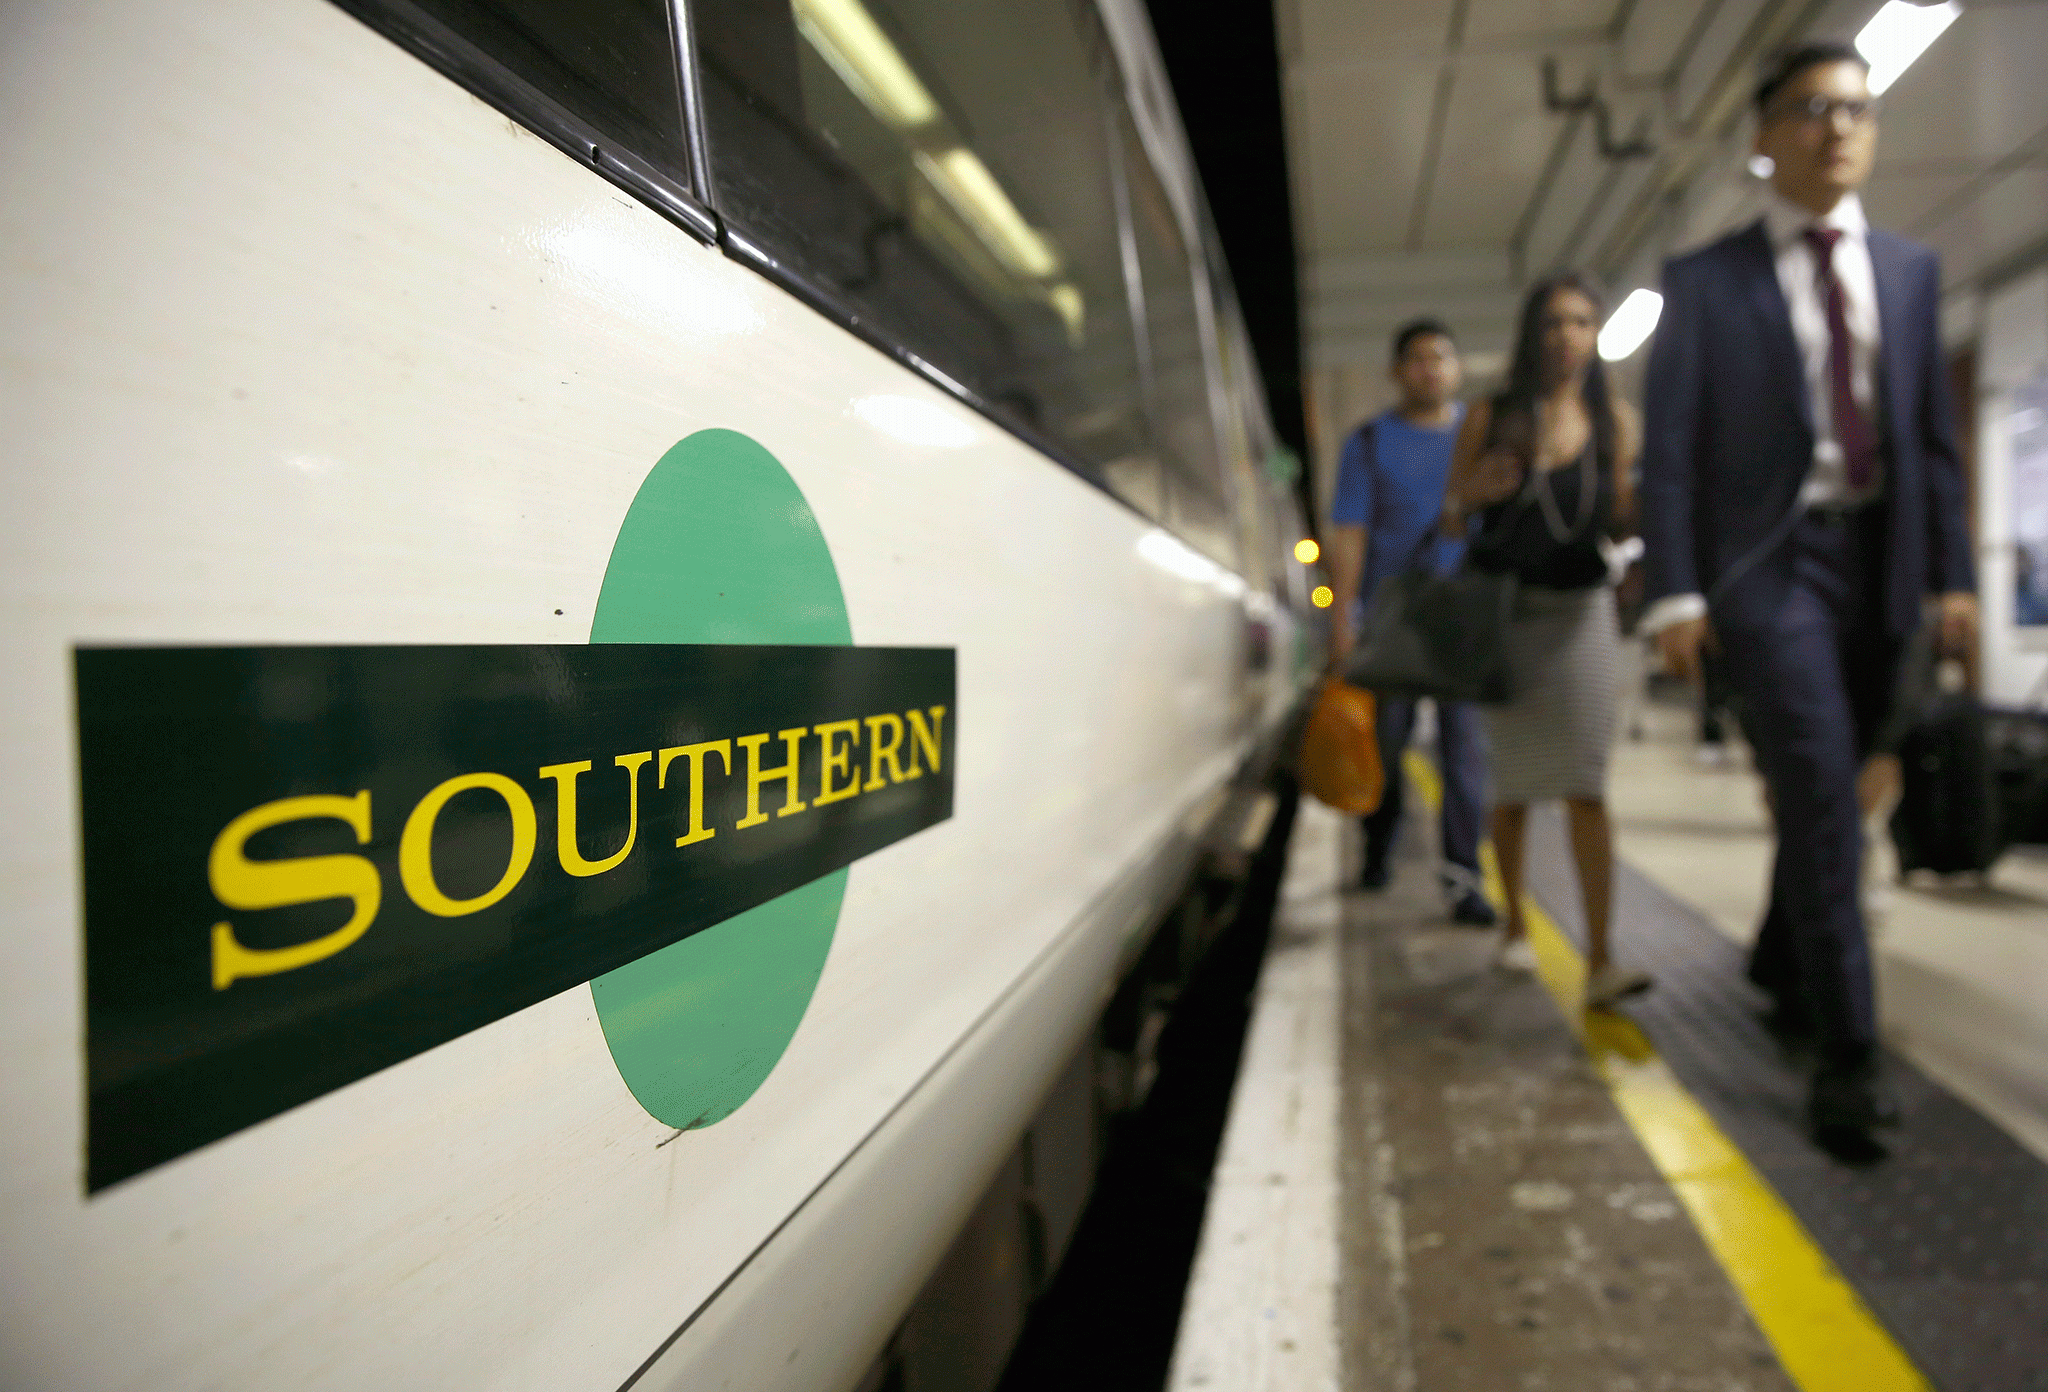 Southern Rail owner profits hit £100m one day after £20m government 'bailout'